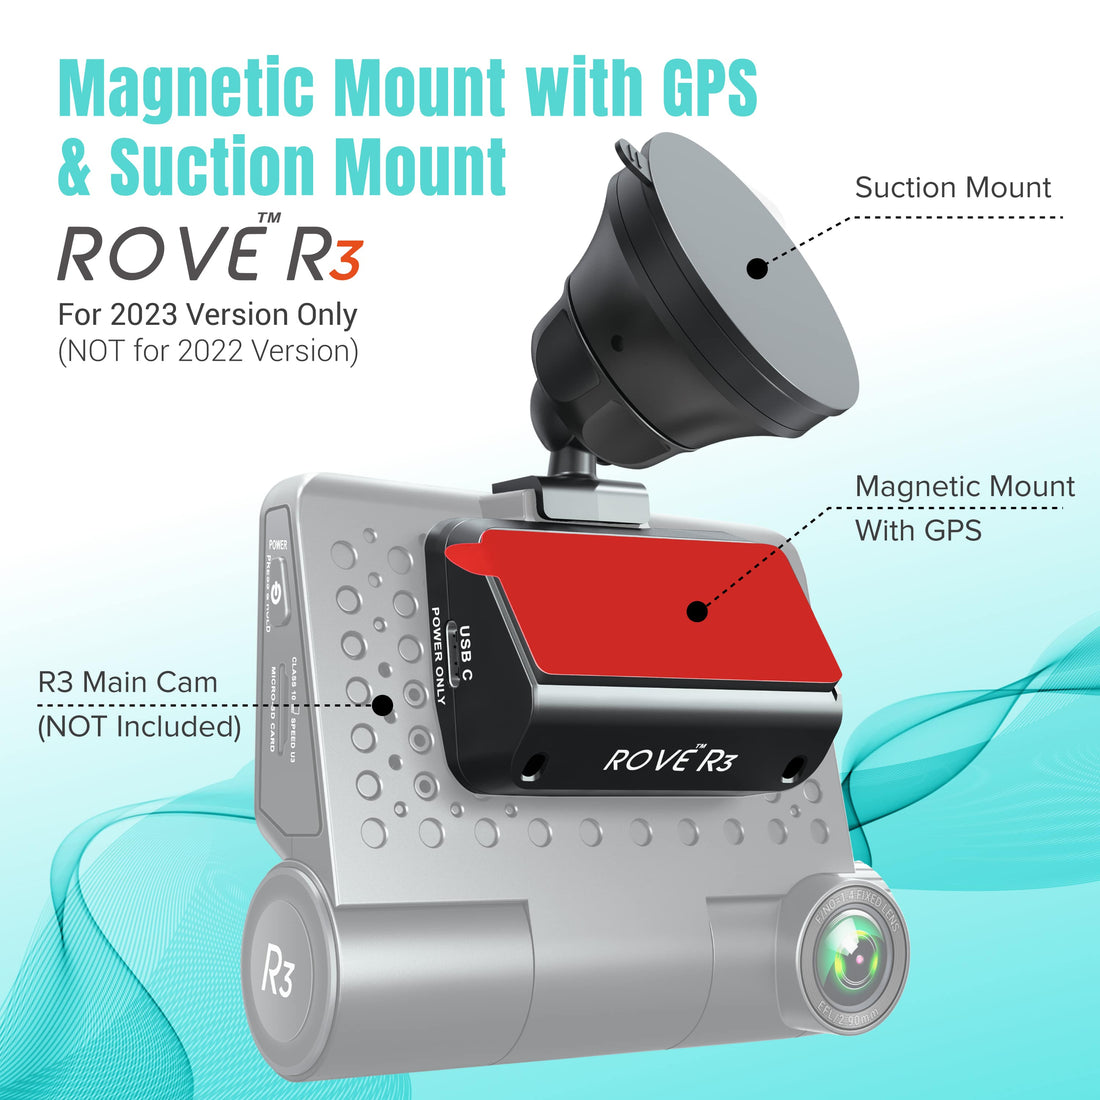 R3 Mount Bundle - R3 Suction Mount + Magnetic Mount with Built-In GPS + 2x Free Easy Peel Electrostatic Film + 2x 3M Sticky Tapes